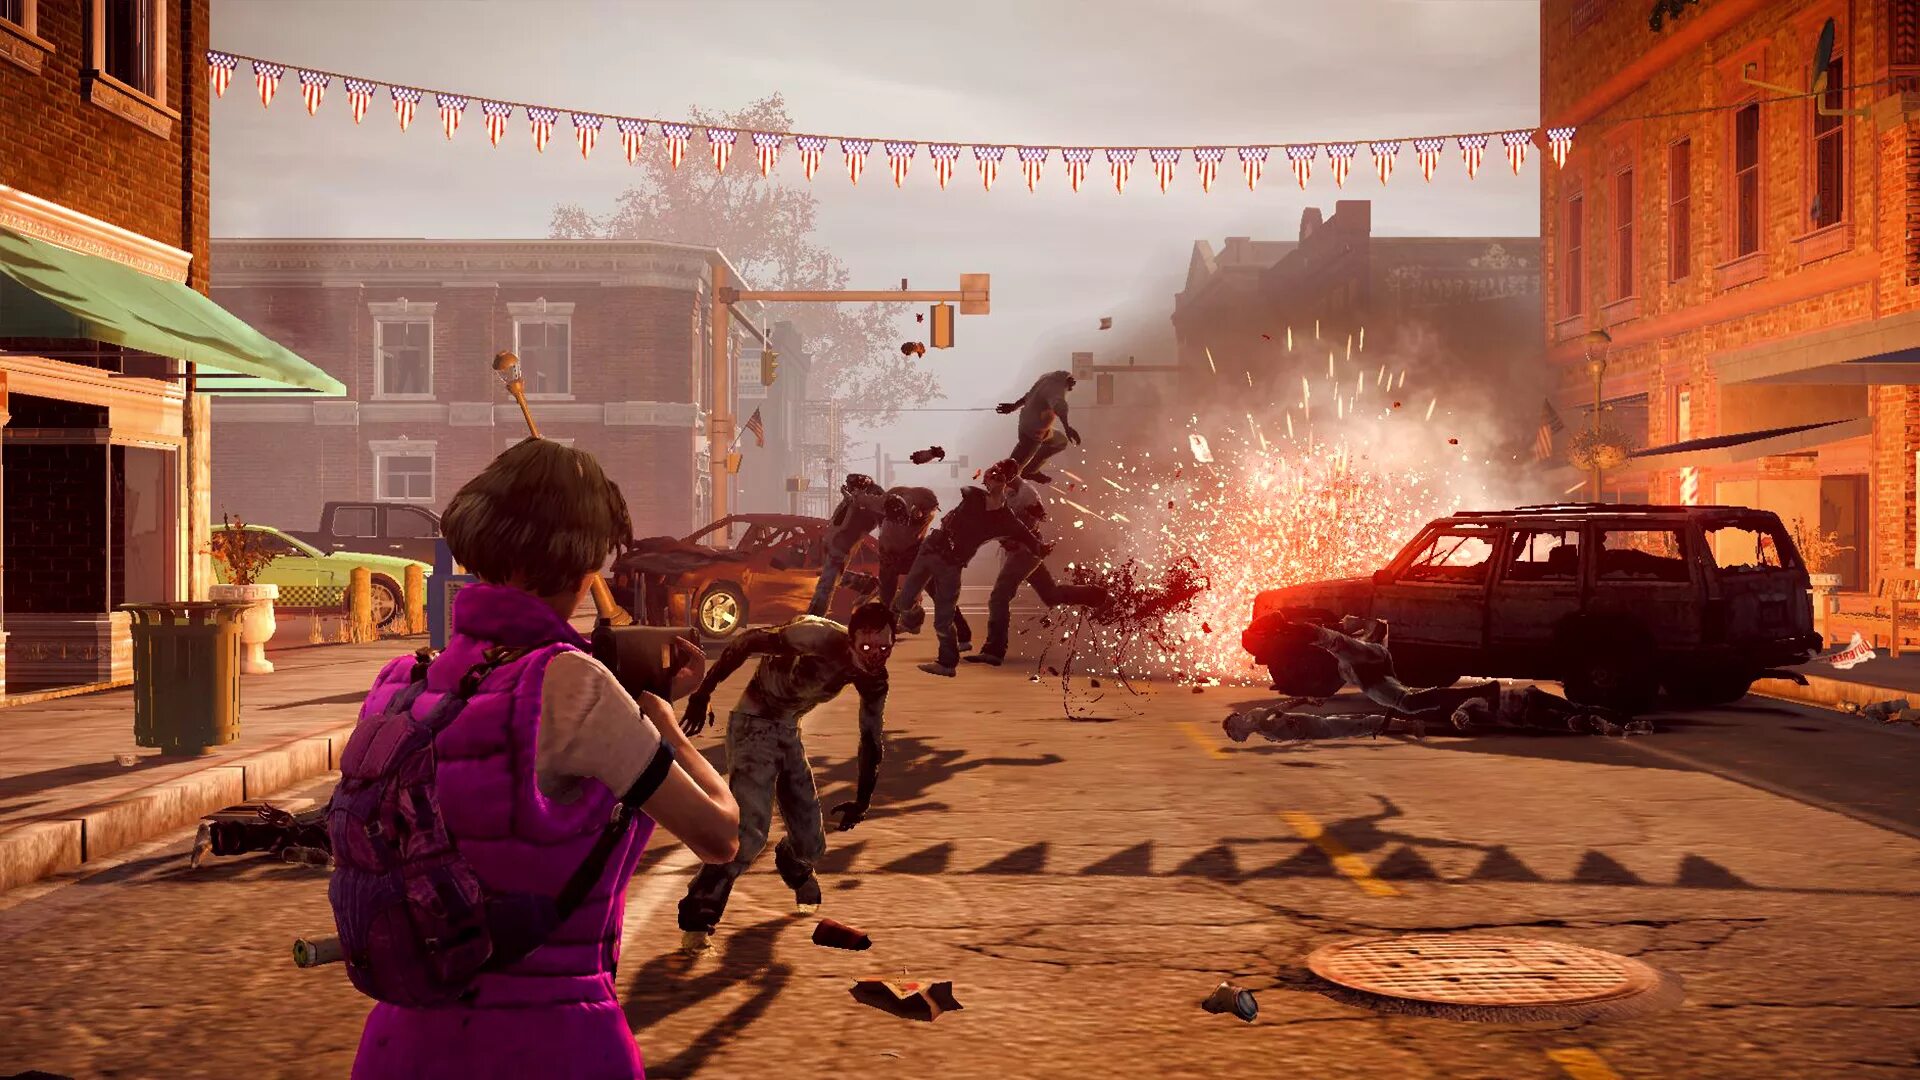 Игра State of Decay 2. State of Decay 2 Скриншоты. DC State. Igra